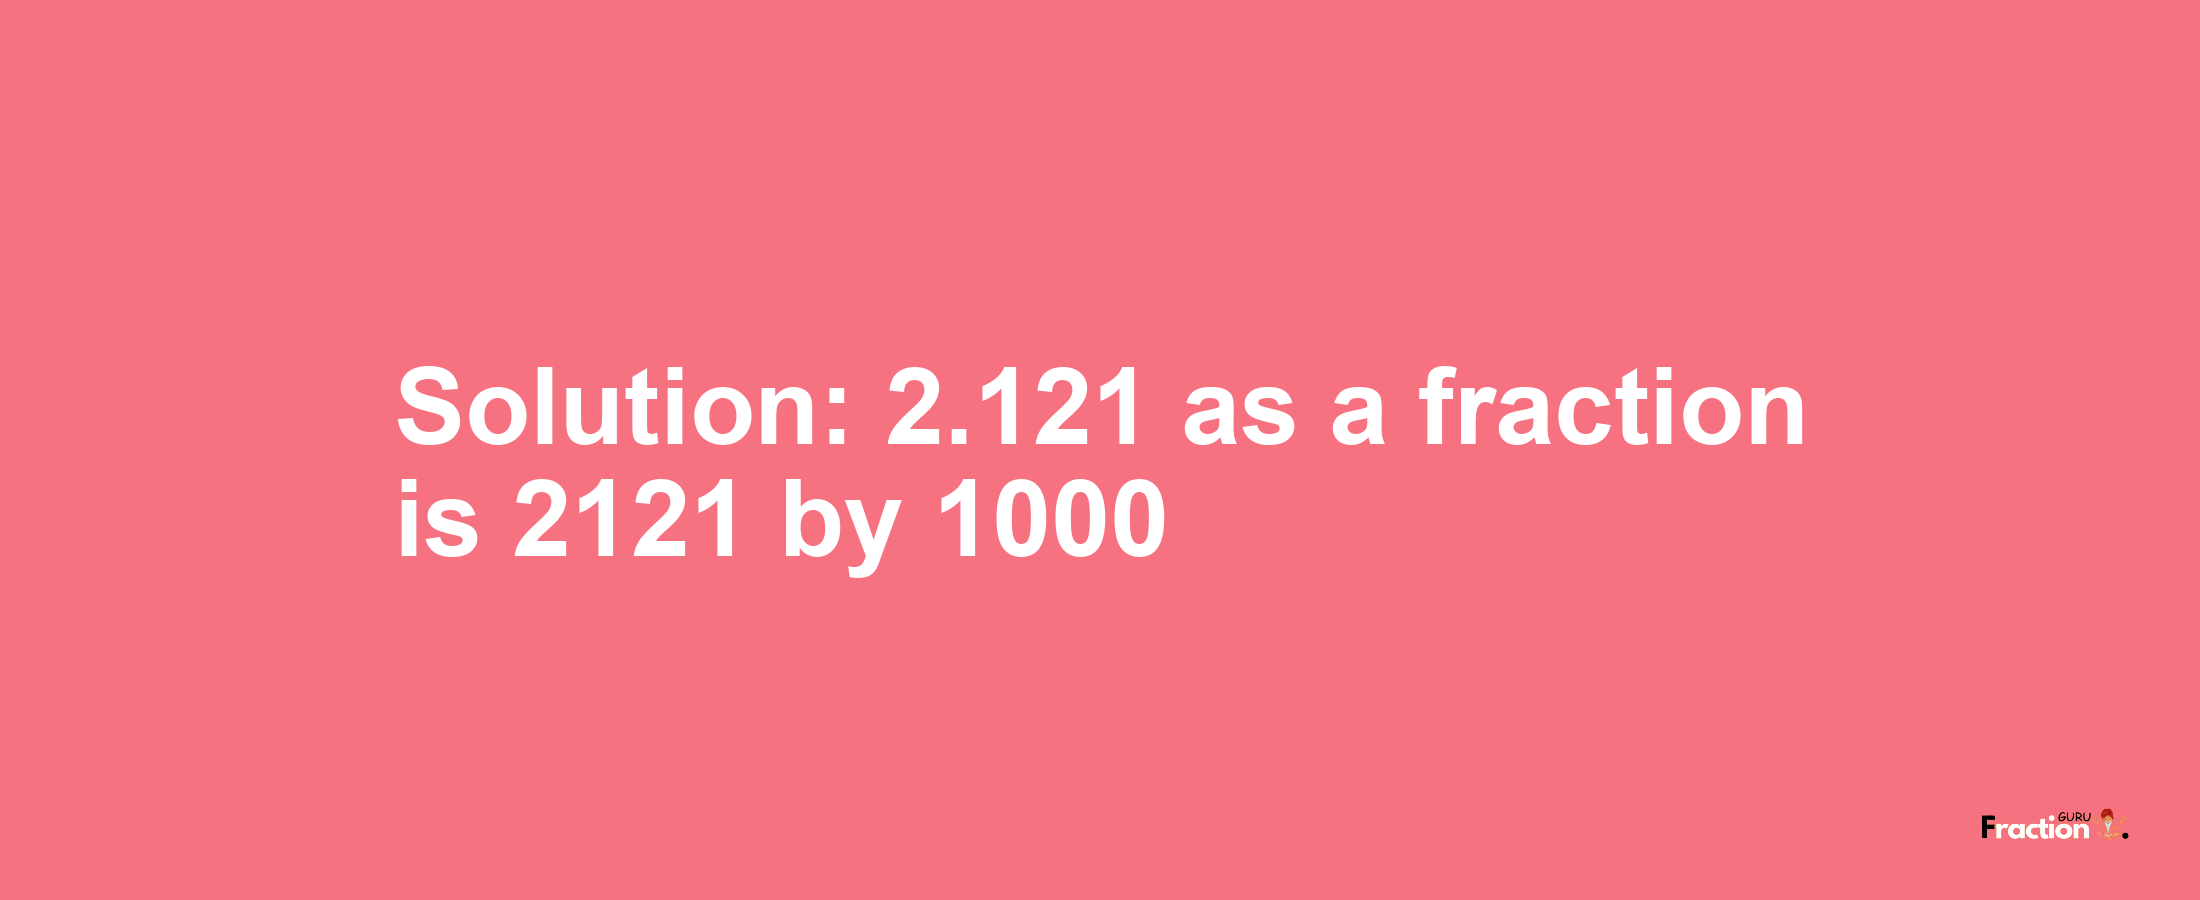 Solution:2.121 as a fraction is 2121/1000